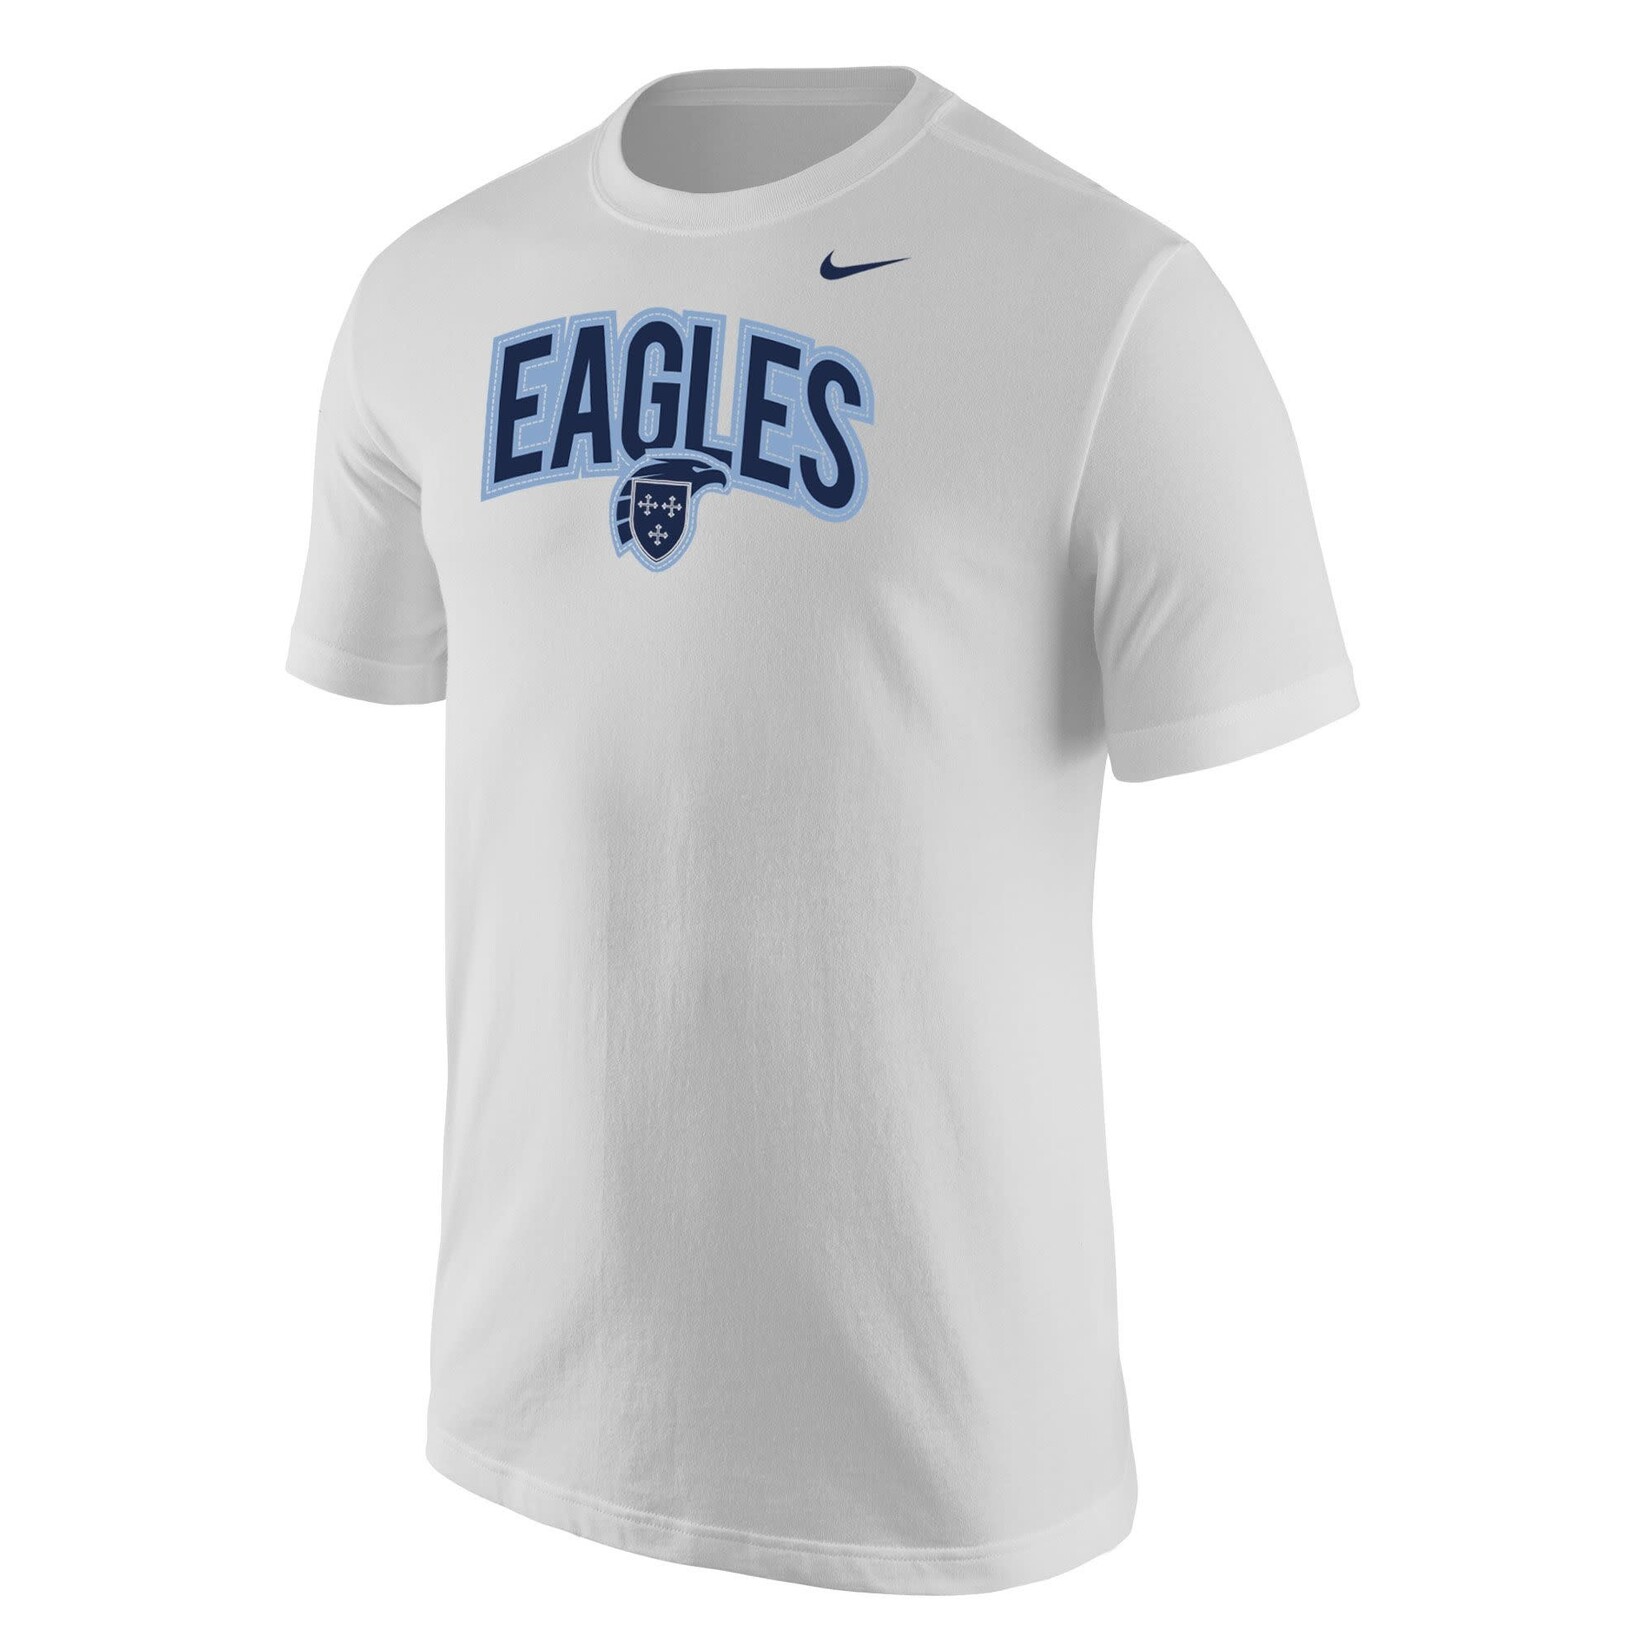 Nike Nike ME WHT Core Tee EAGLES Patch with Lt Blue Fill